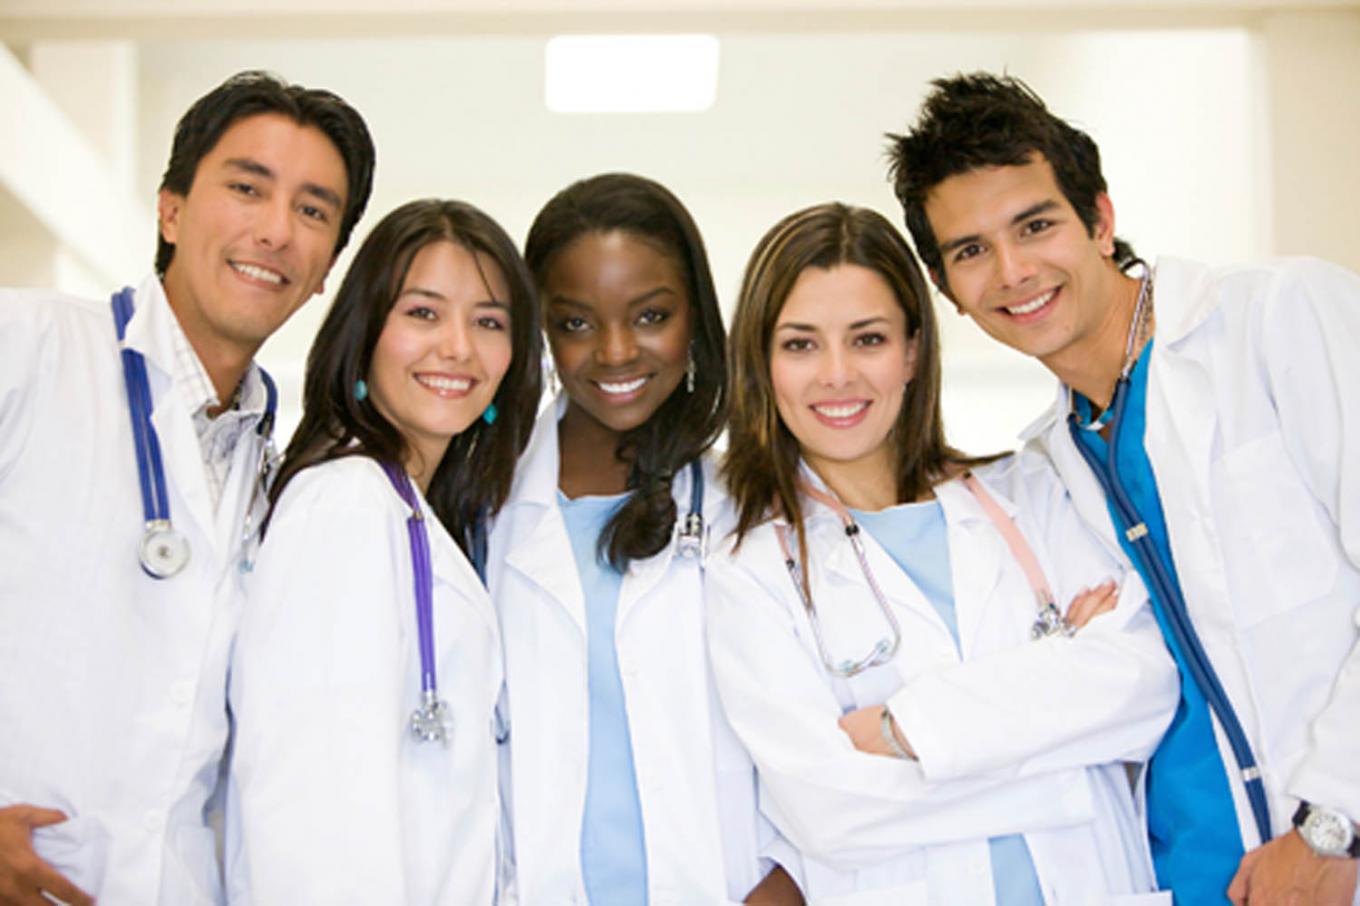 Smiling students in white lab coats